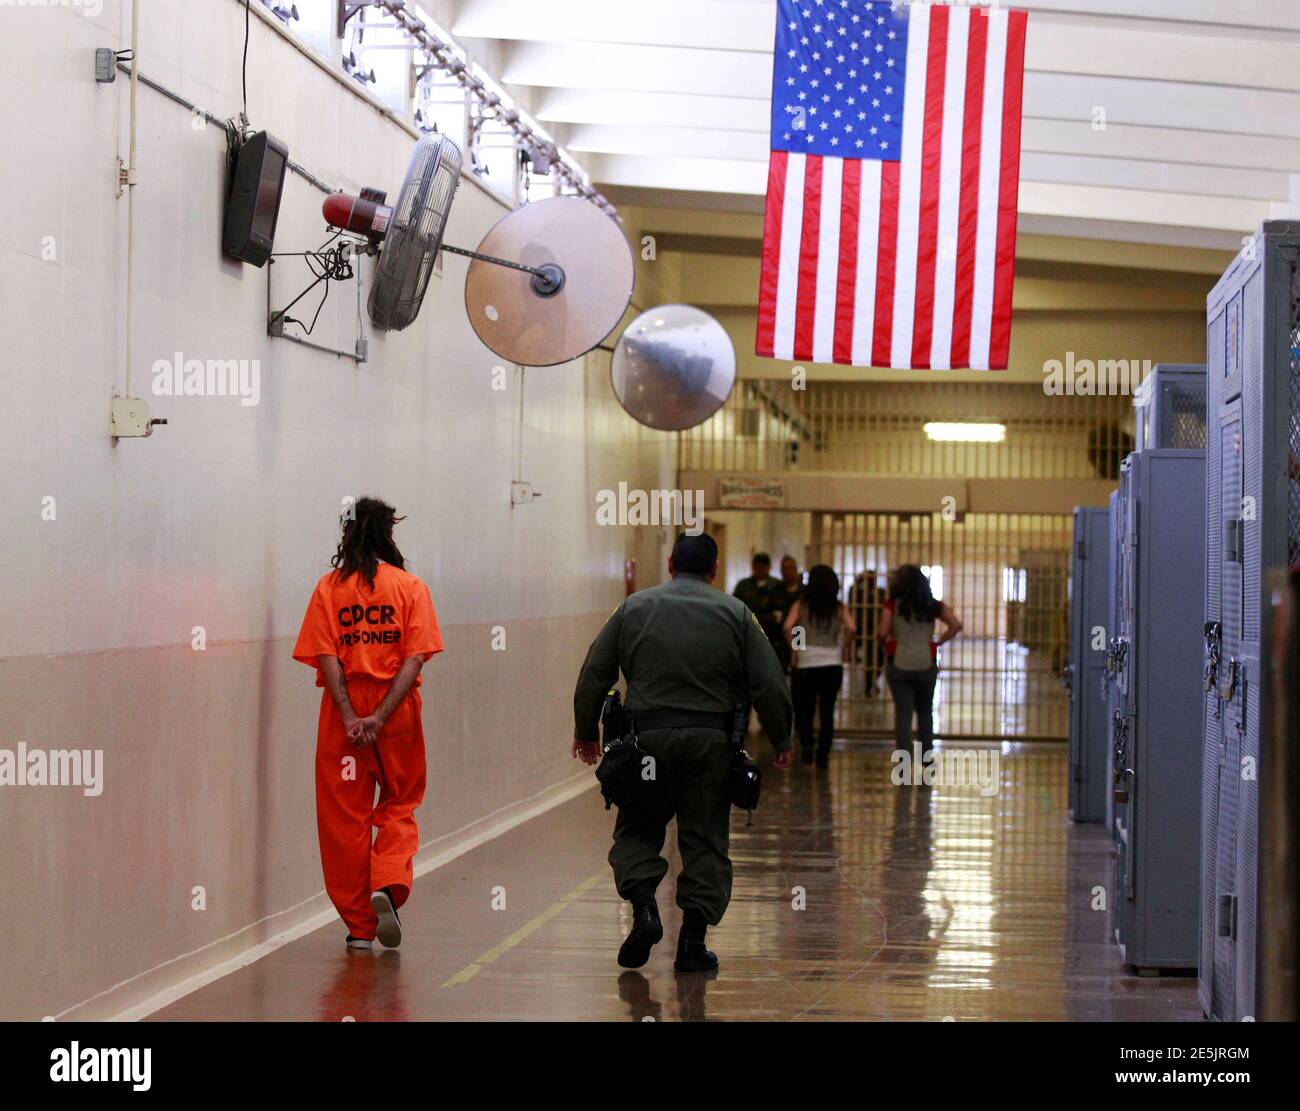 An inmate is led by a prison guard at the California Institution for Men state prison in Chino, California, June 3, 2011. The Supreme Court has ordered California to release more than 30,000 inmates over the next two years or take other steps to ease overcrowding in its prisons to prevent 'needless suffering and death.' California's 33 adult prisons were designed to hold about 80,000 inmates and now have about 145,000. The U.S. has more than 2 million people in state and local prisons. It has long had the highest incarceration rate in the world. REUTERS/Lucy Nicholson (UNITED STATES - Tags: CR Stock Photo